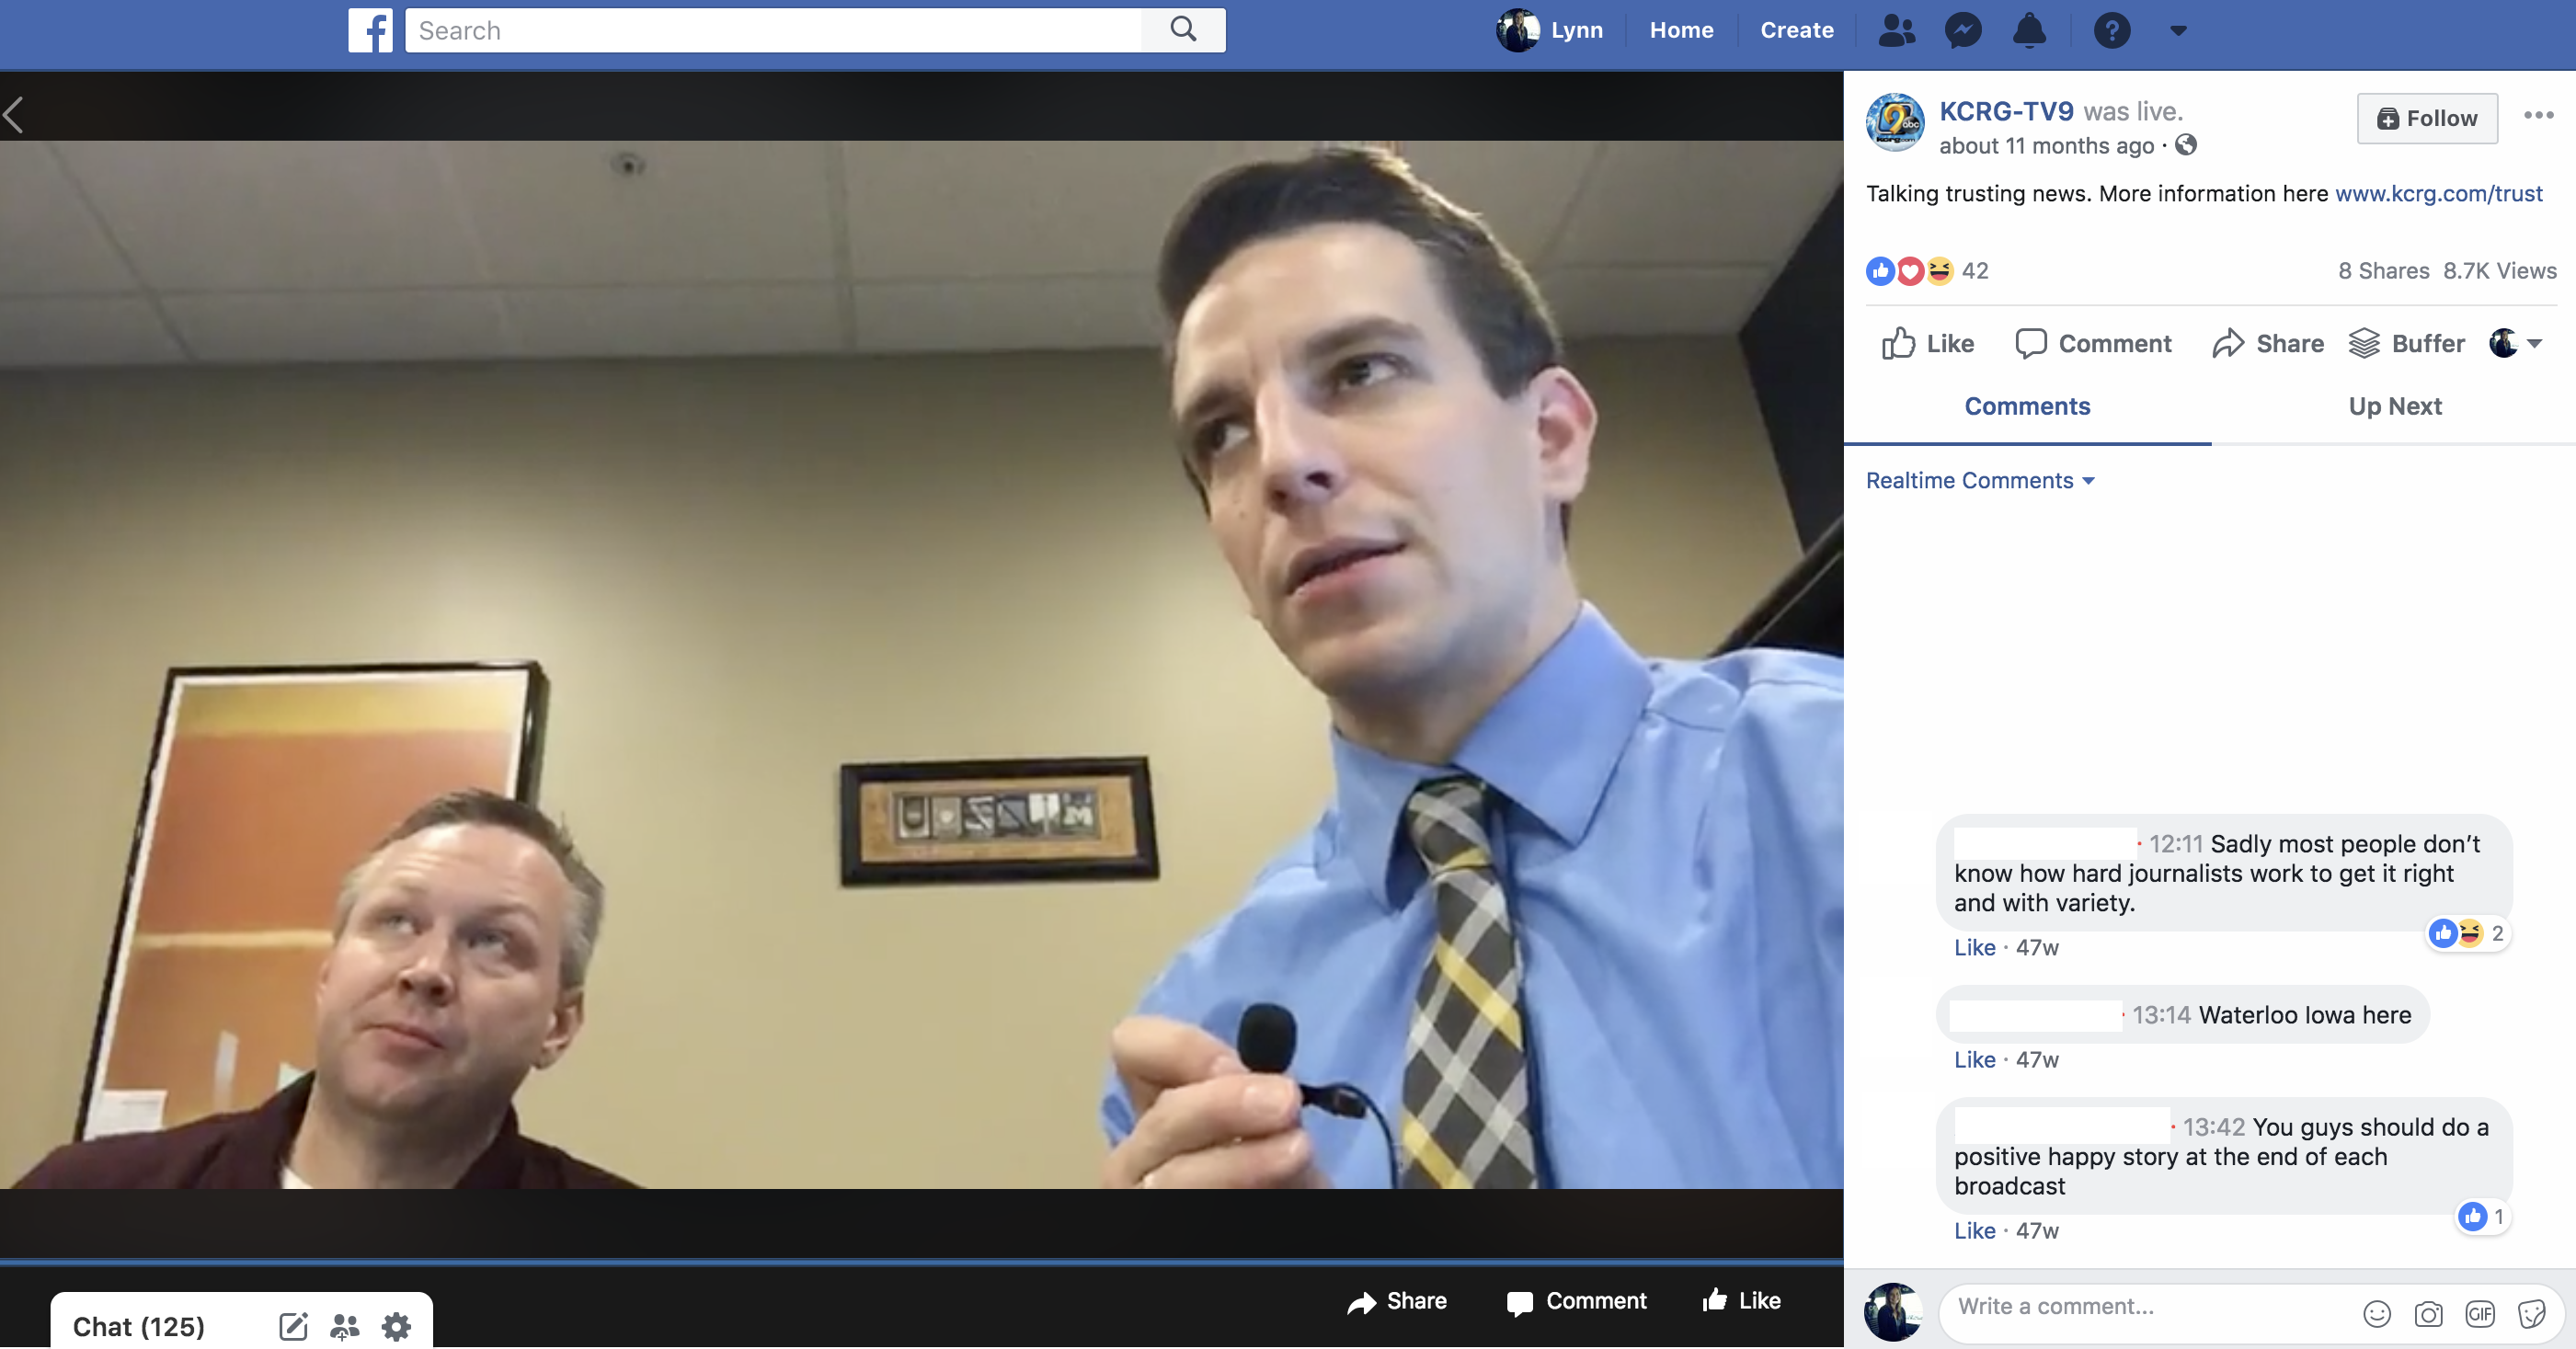 Screenshot from a Facebook LIVE Q&A with KCRG's news director. 